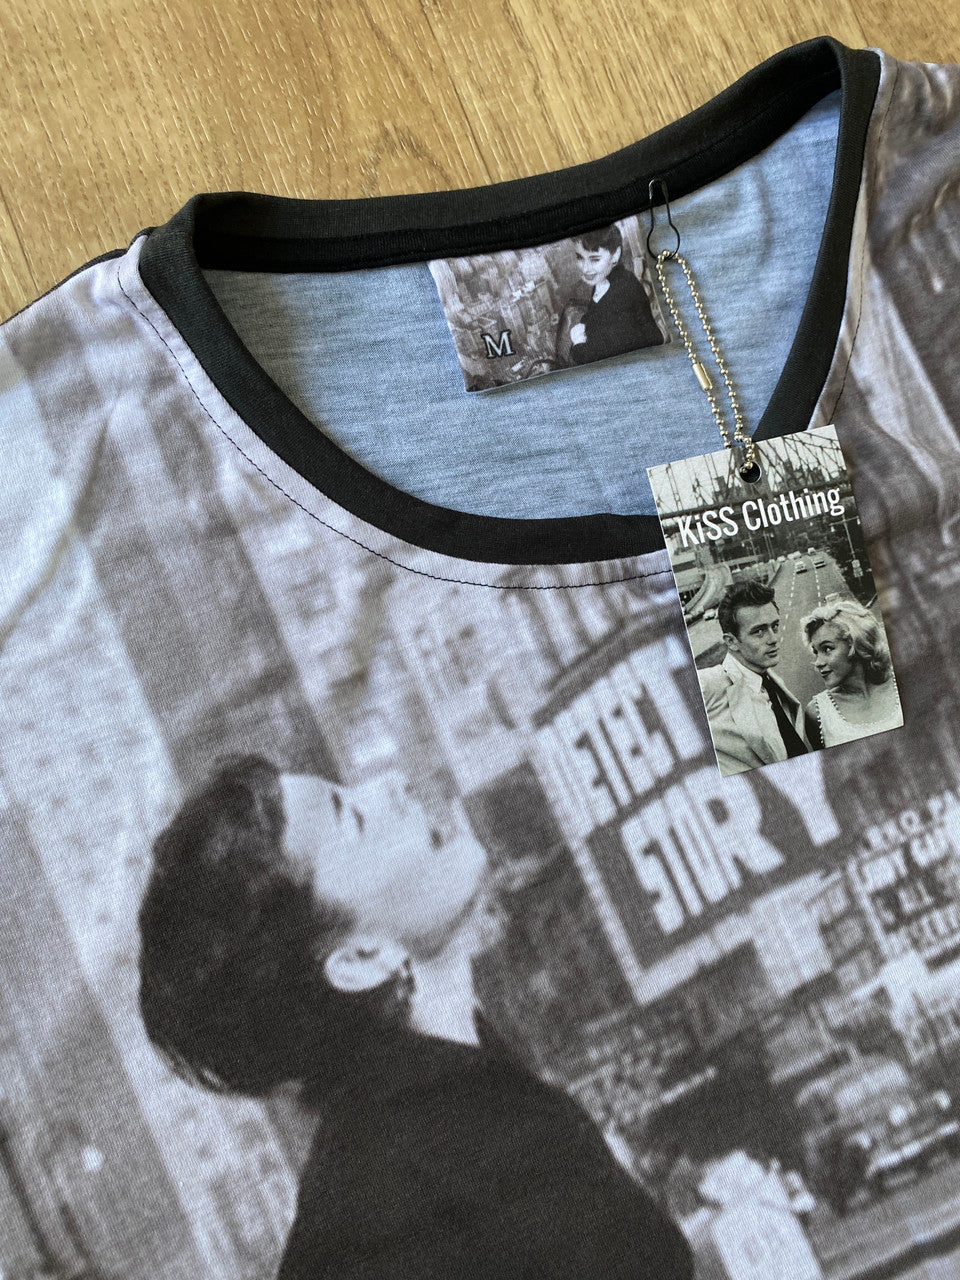 Audrey Hepburn 1951 KiSS Cut And Sew T-Shirt - 60s 50s - Hollywood Actress Vintage - Breakfast at Tiffany's - Times Square New York